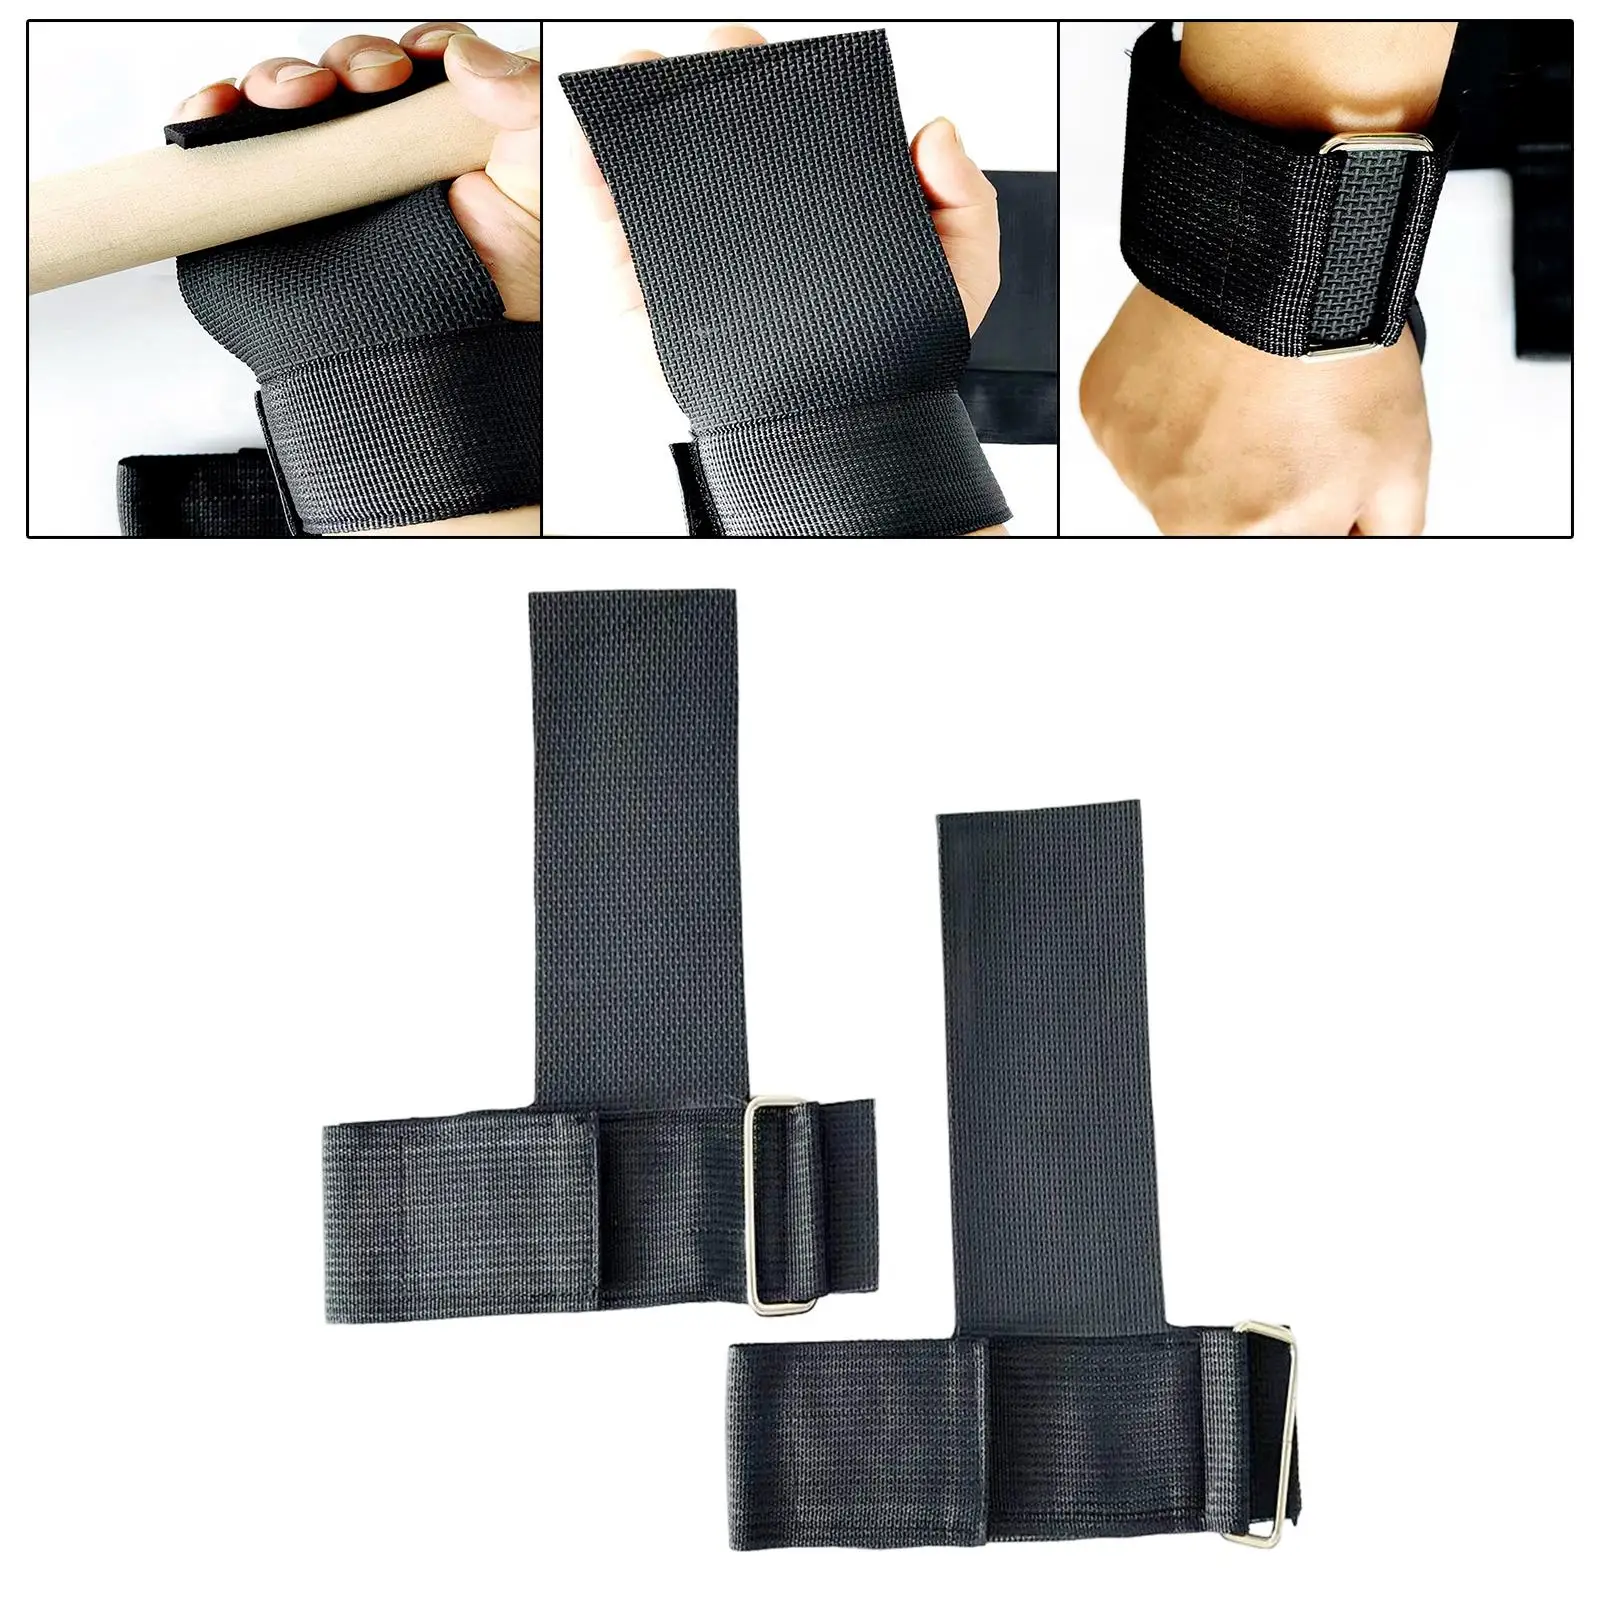 2x Professional Weight Lifting Straps Wrist Wraps Gloves Anti Skid Training Weightlifting Deadlift Bench Press Gym